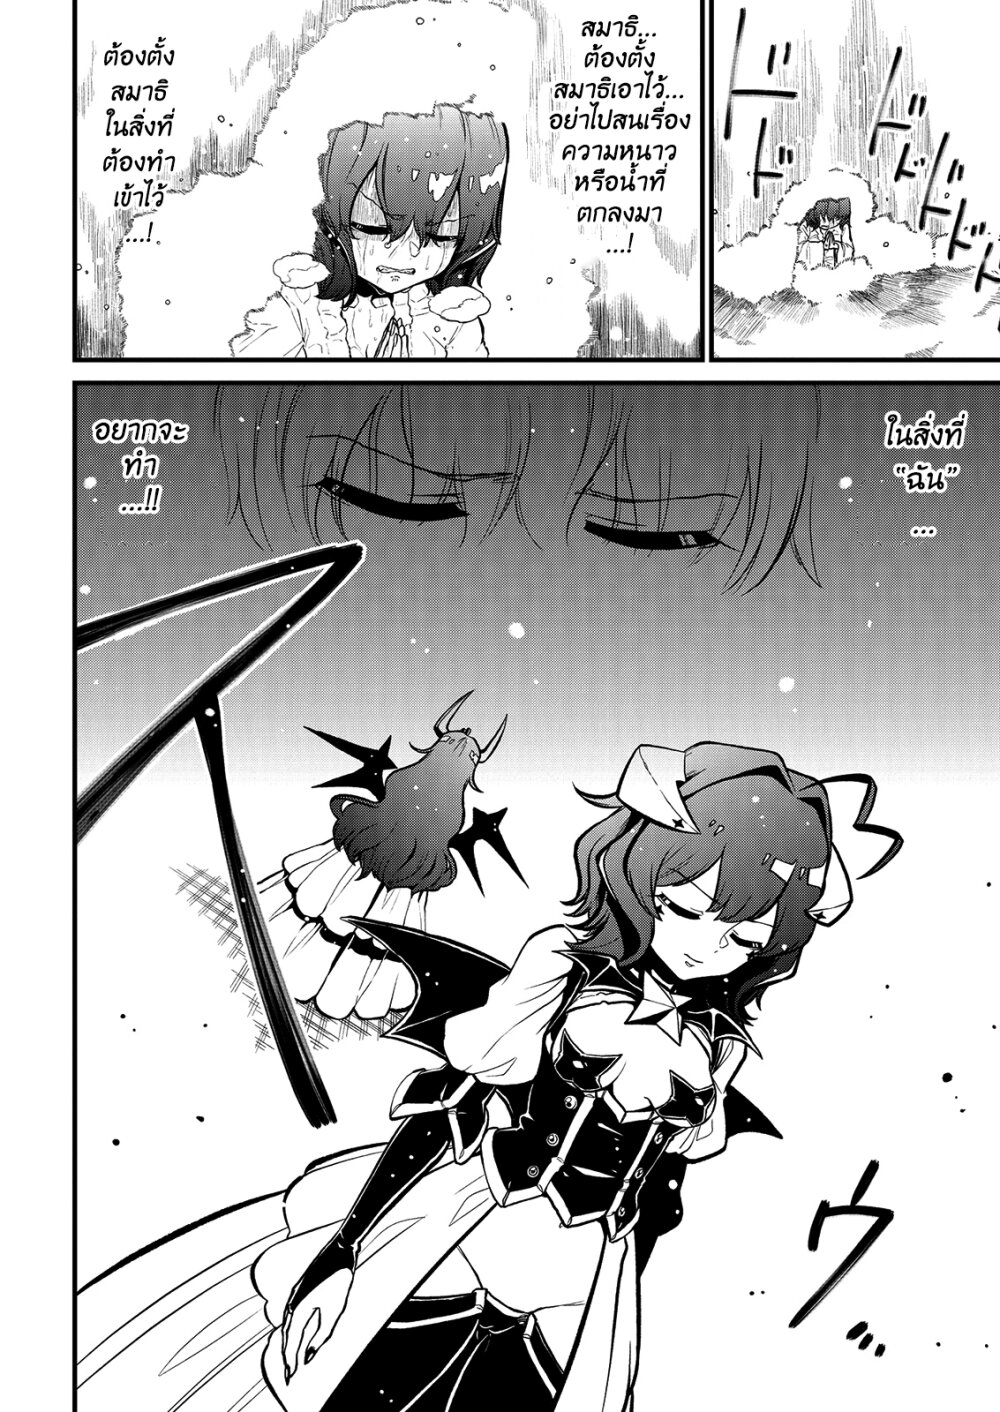 Looking up to Magical Girls 38 (12)